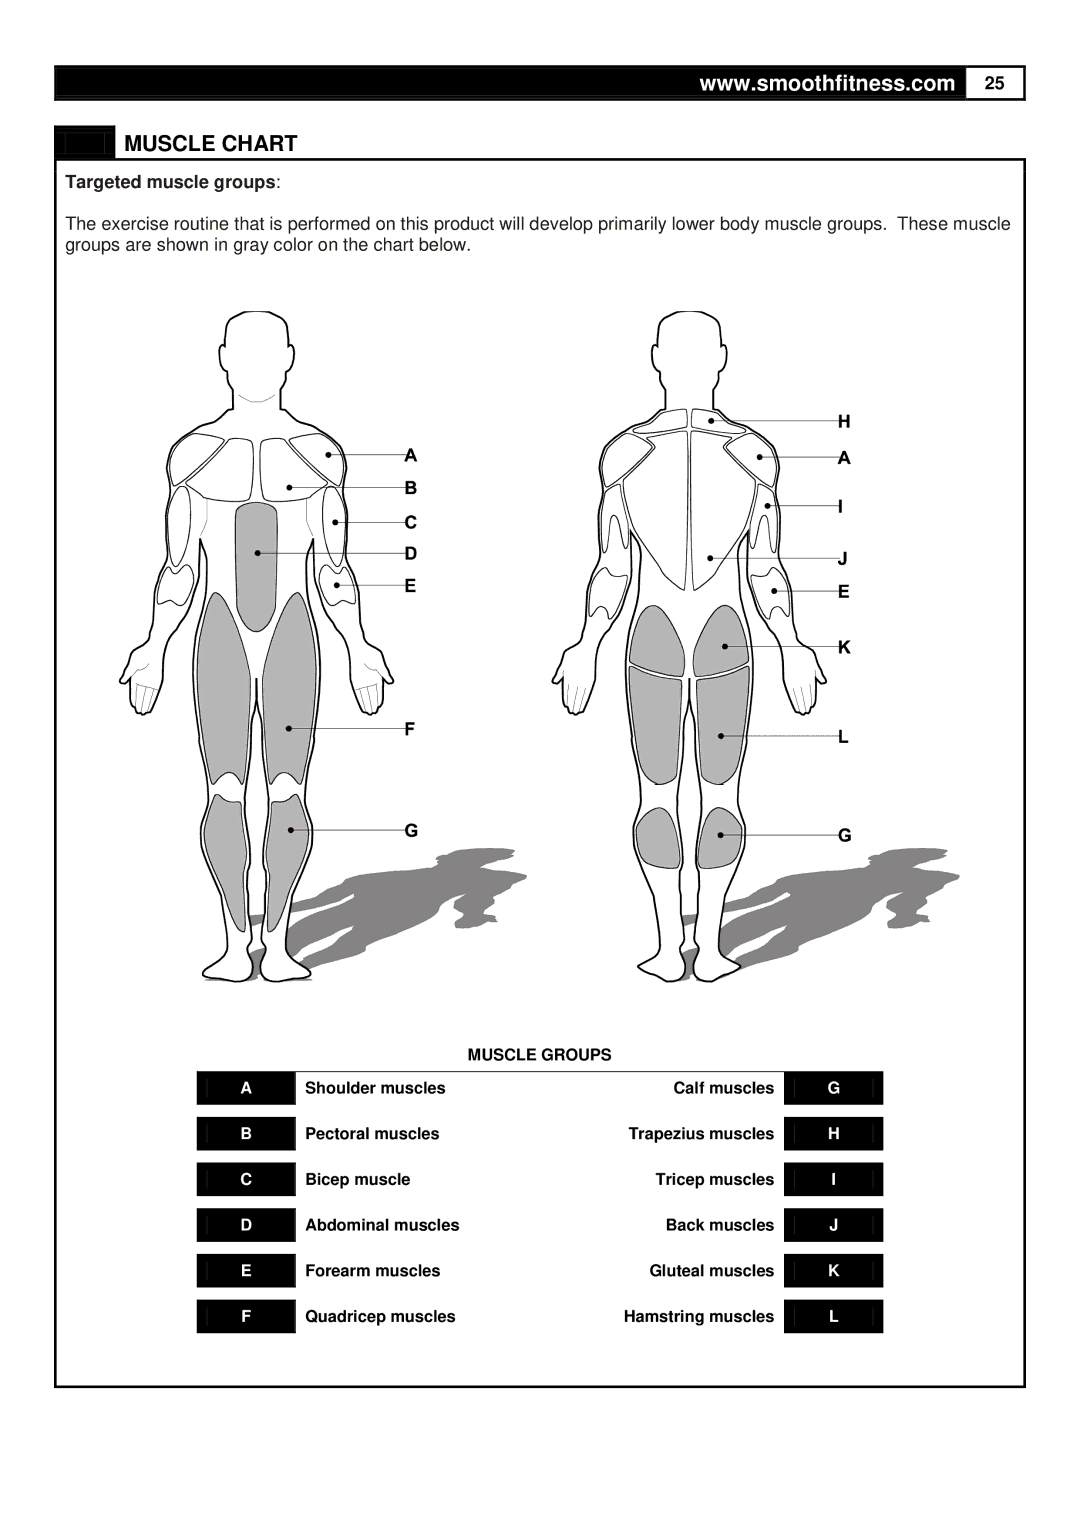 Smooth Fitness 935 user manual Muscle Chart, Targeted muscle groups 